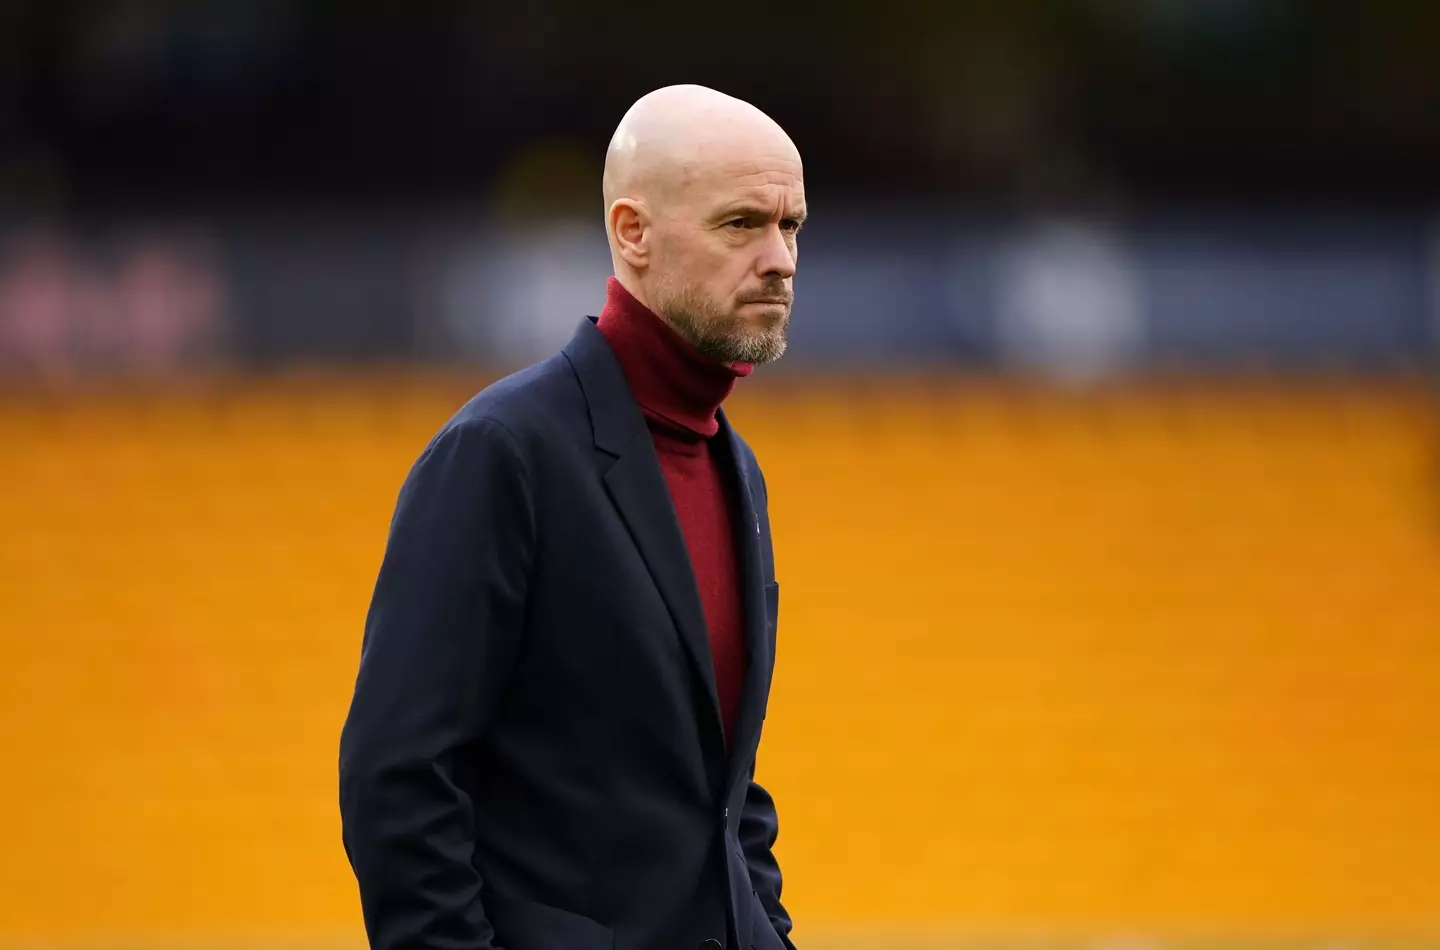 Ten Hag has shown himself to be a tough boss so far at United. Image: Alamy